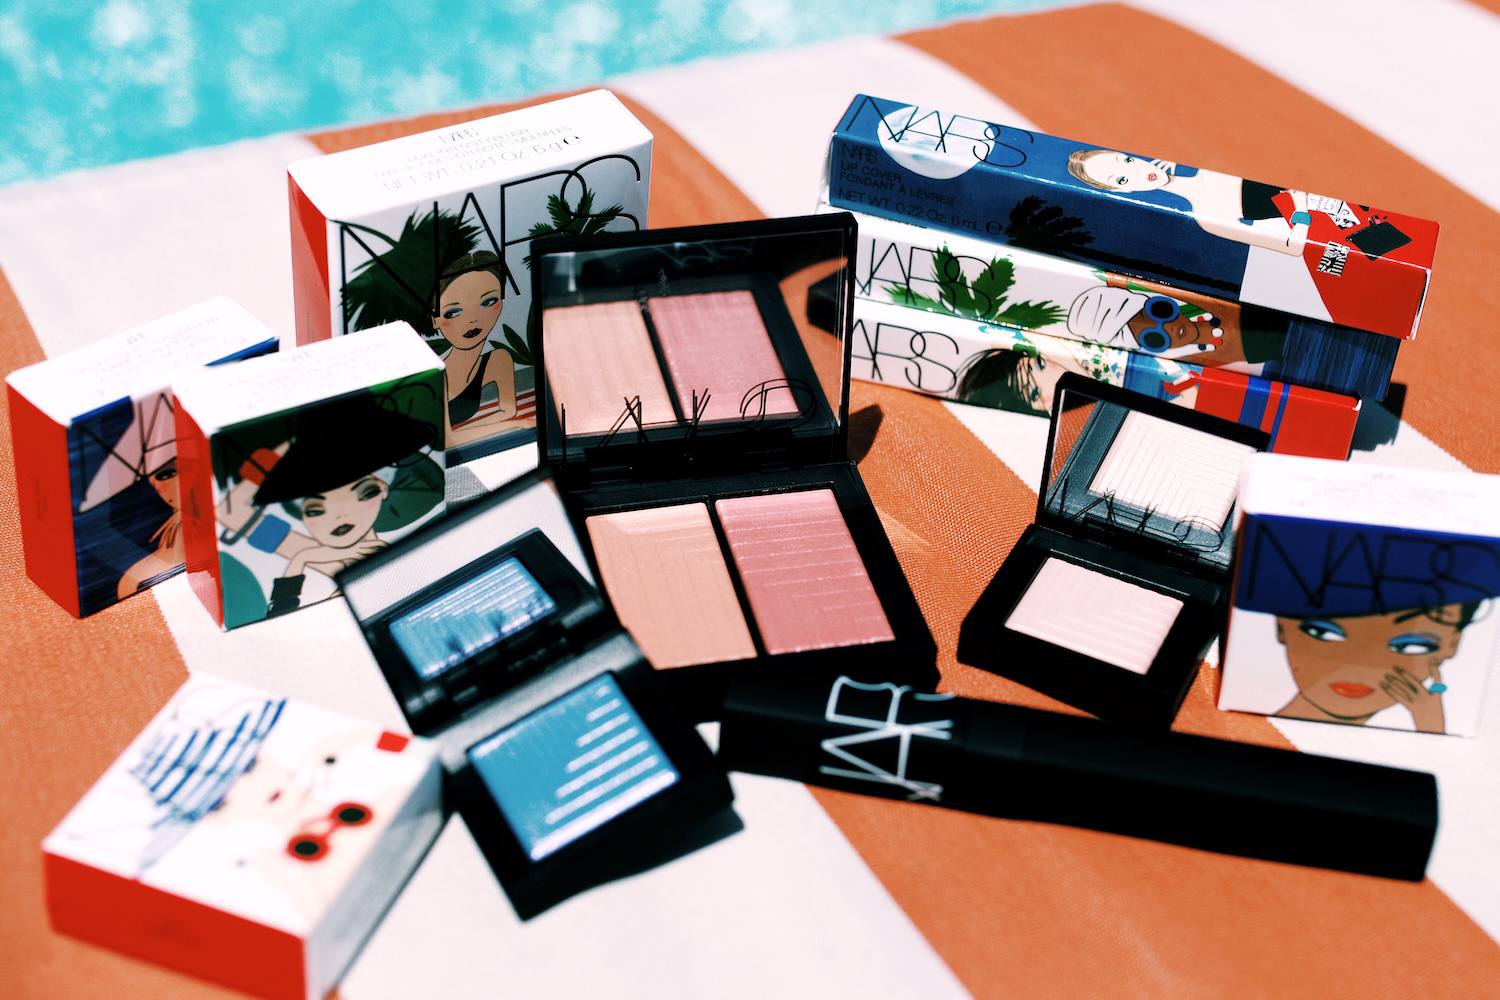 NARS summer collection